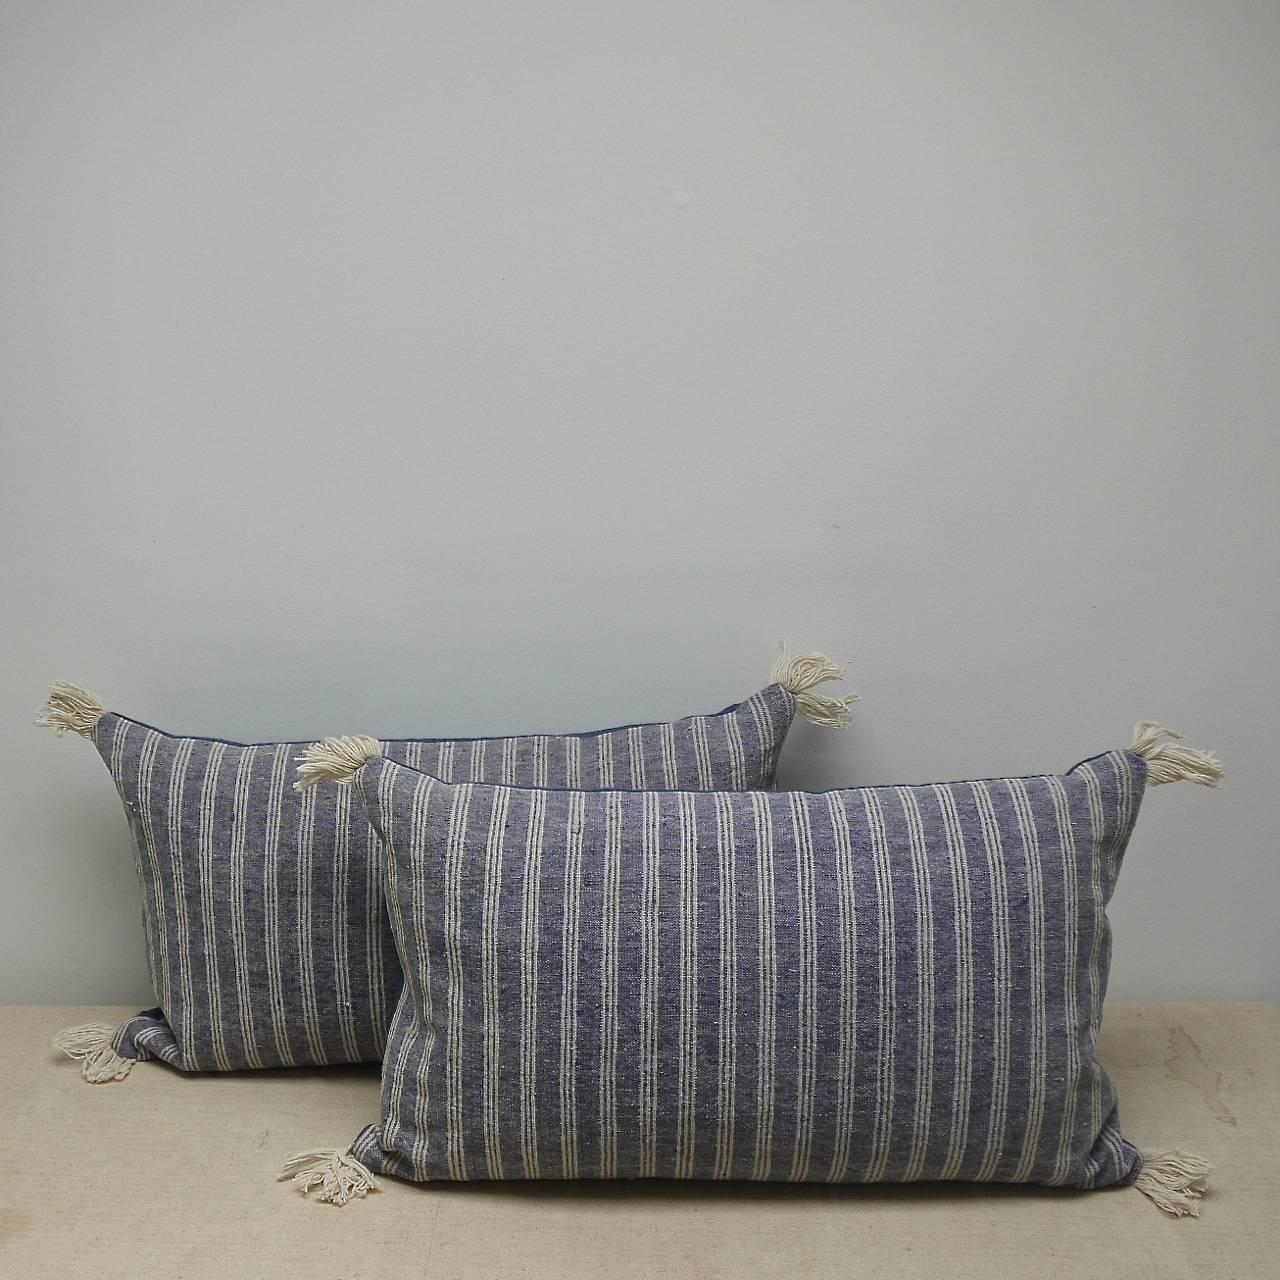 French 19th century cotton and wool striped cushions with antique wool fringing on each corner. The soft indigo stripe alternates with one of a very pale greenish hue.
Backed with a dyed 19th century French linen and slip-stitched closed.